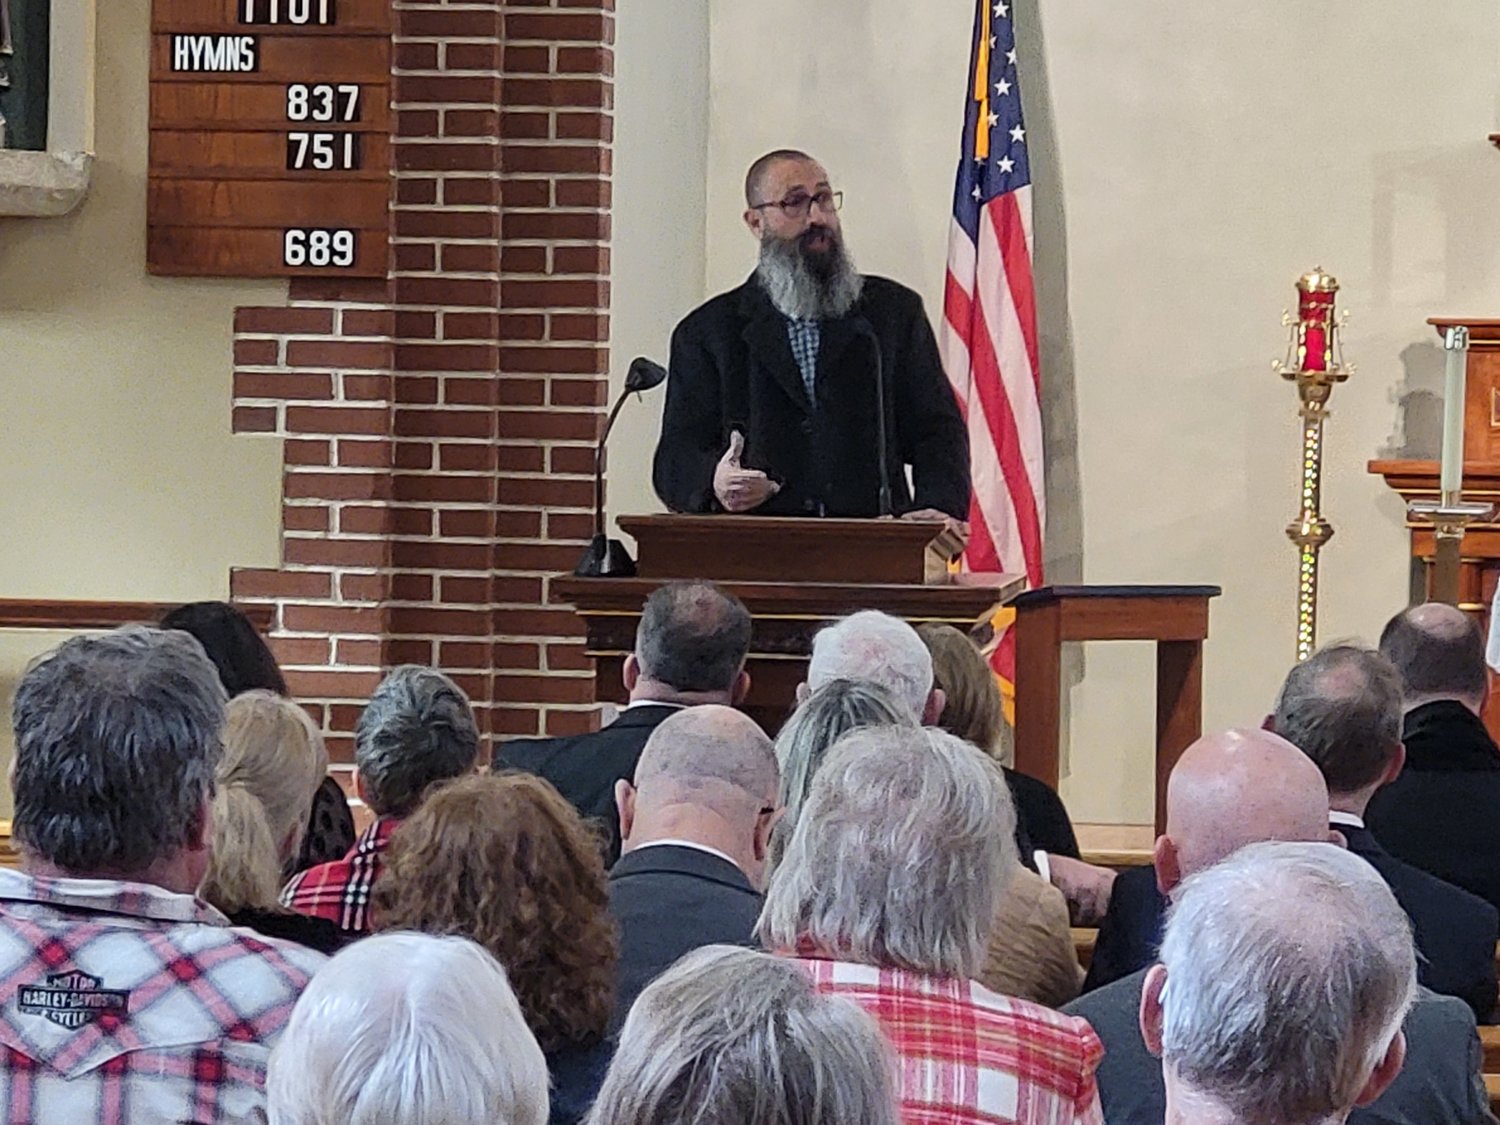 Rami Salfiti, a lifetime resident of the Old City portion of Jerusalem, speaks to members of the Equestrian Order of the Holy Sepulchre of Jerusalem about the situation facing Christians in the Holy Land, on Feb. 5 in St. Stanislaus Church in Wardsville.